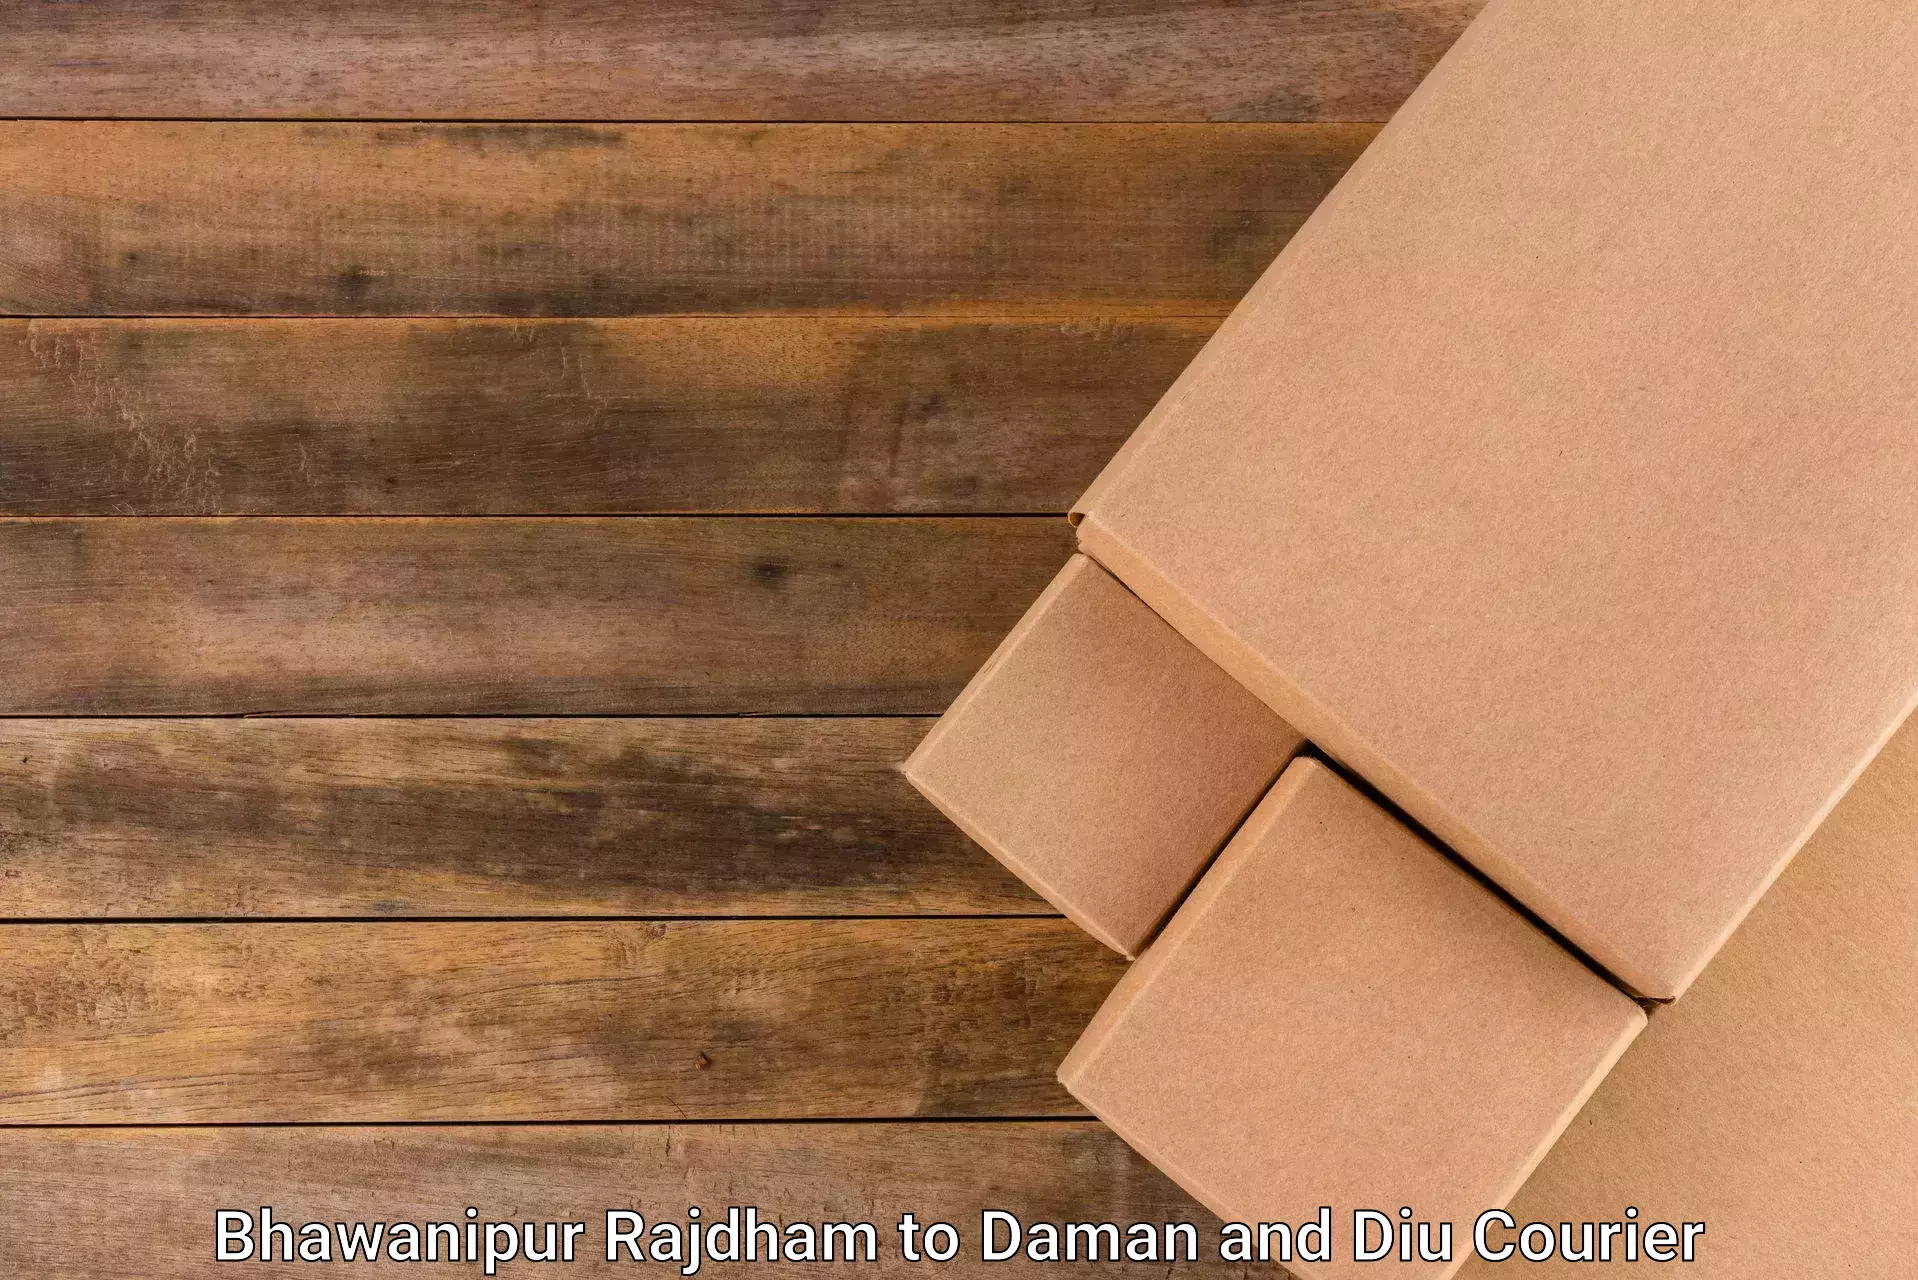 Parcel delivery automation Bhawanipur Rajdham to Diu